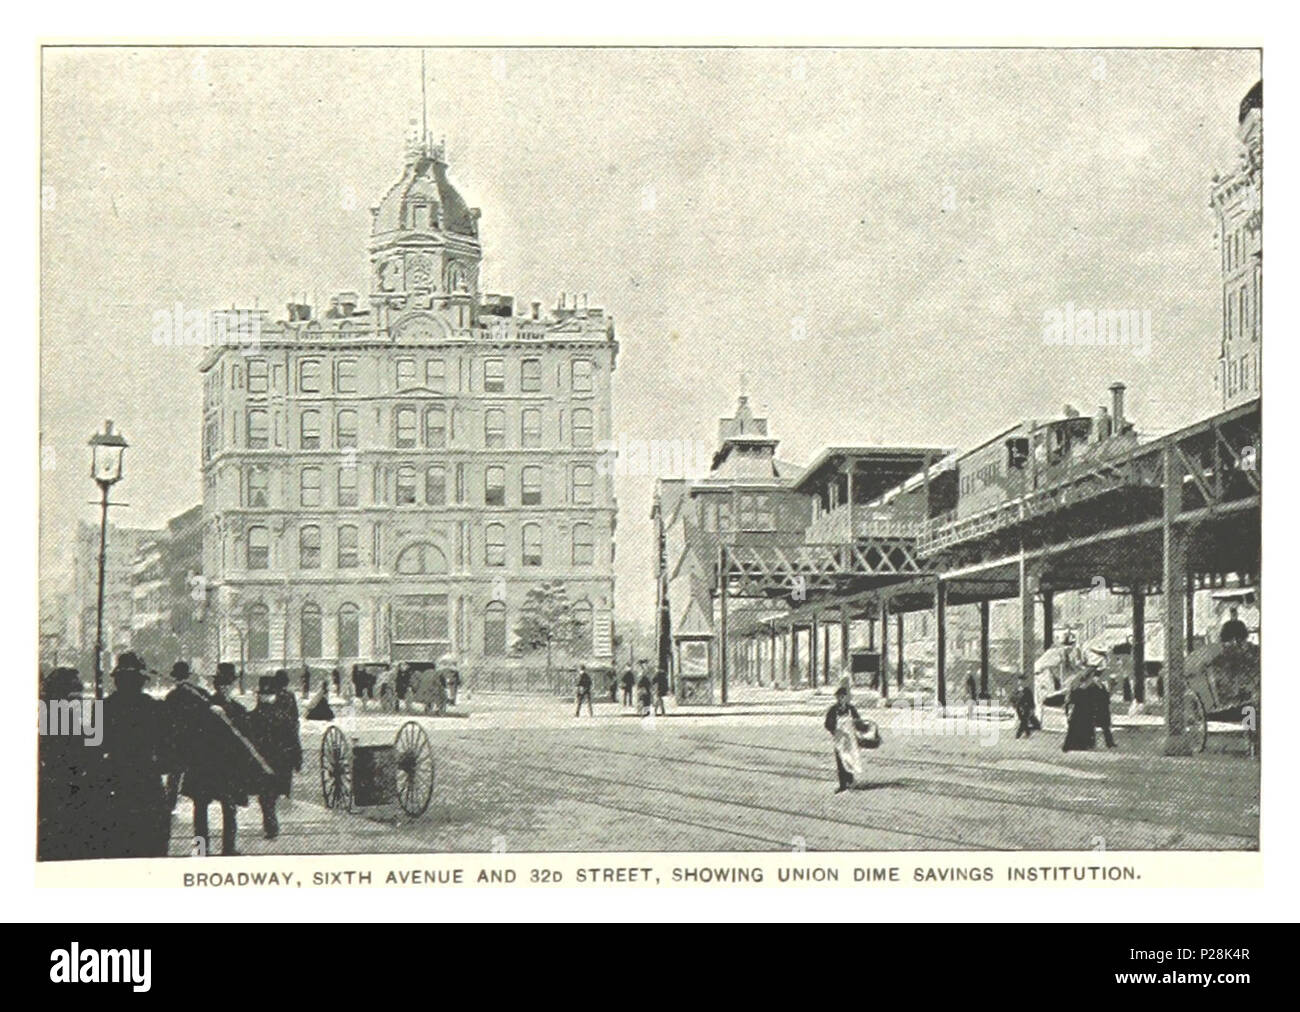 (King1893NYC) pg869 BROADWAY, SIXTH AVENUE AND 32D STREET, SHOWING UNION DIME SAVING INSTITUTION. Stock Photo